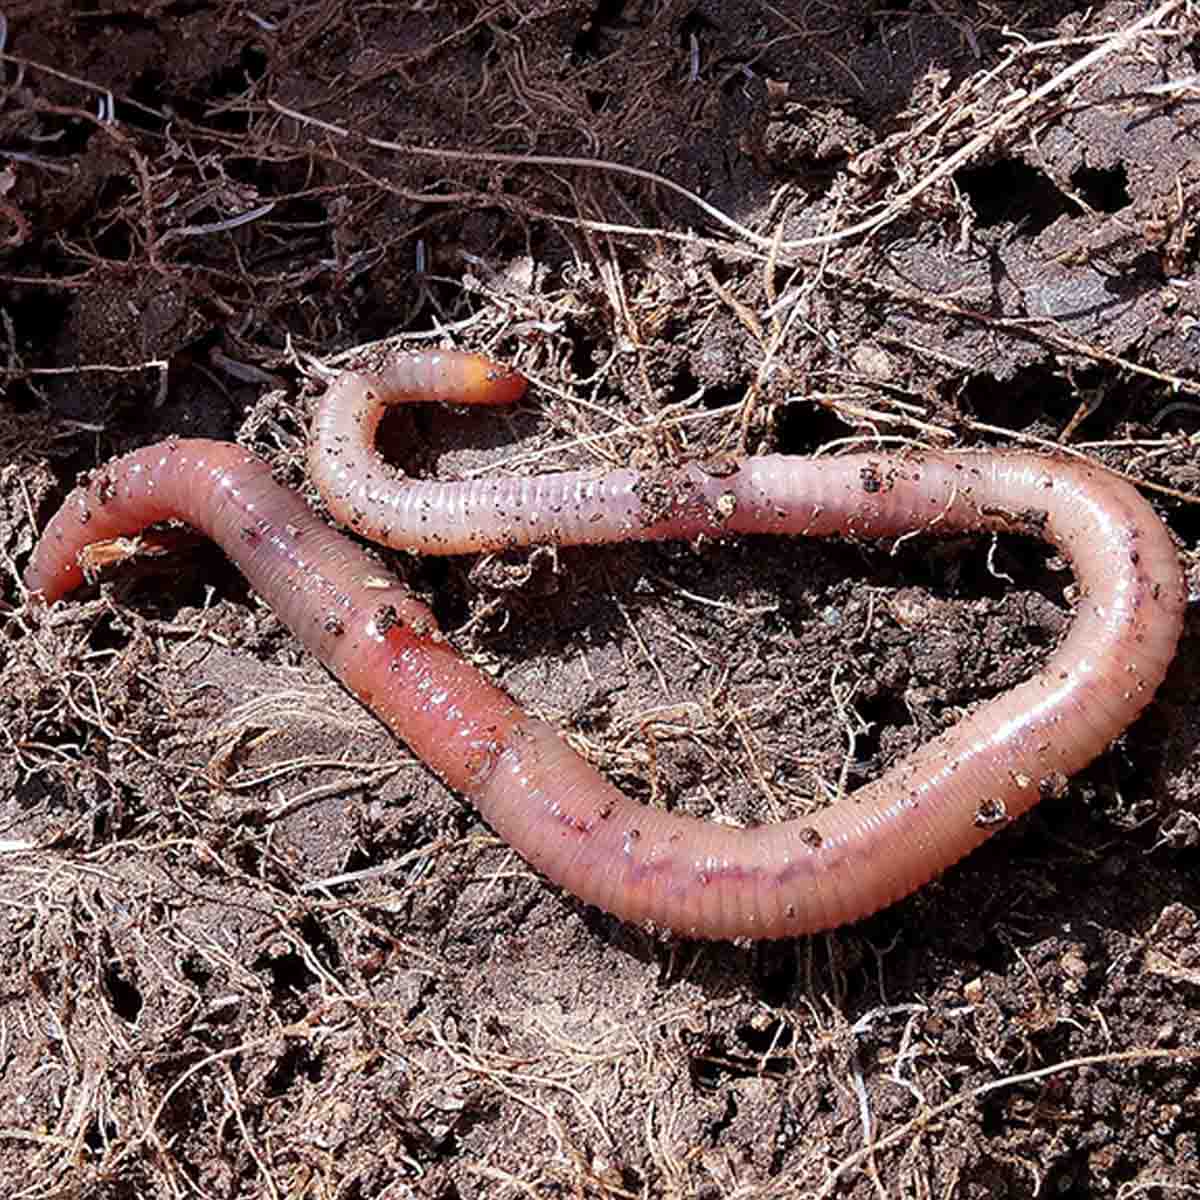 A worm on dirt